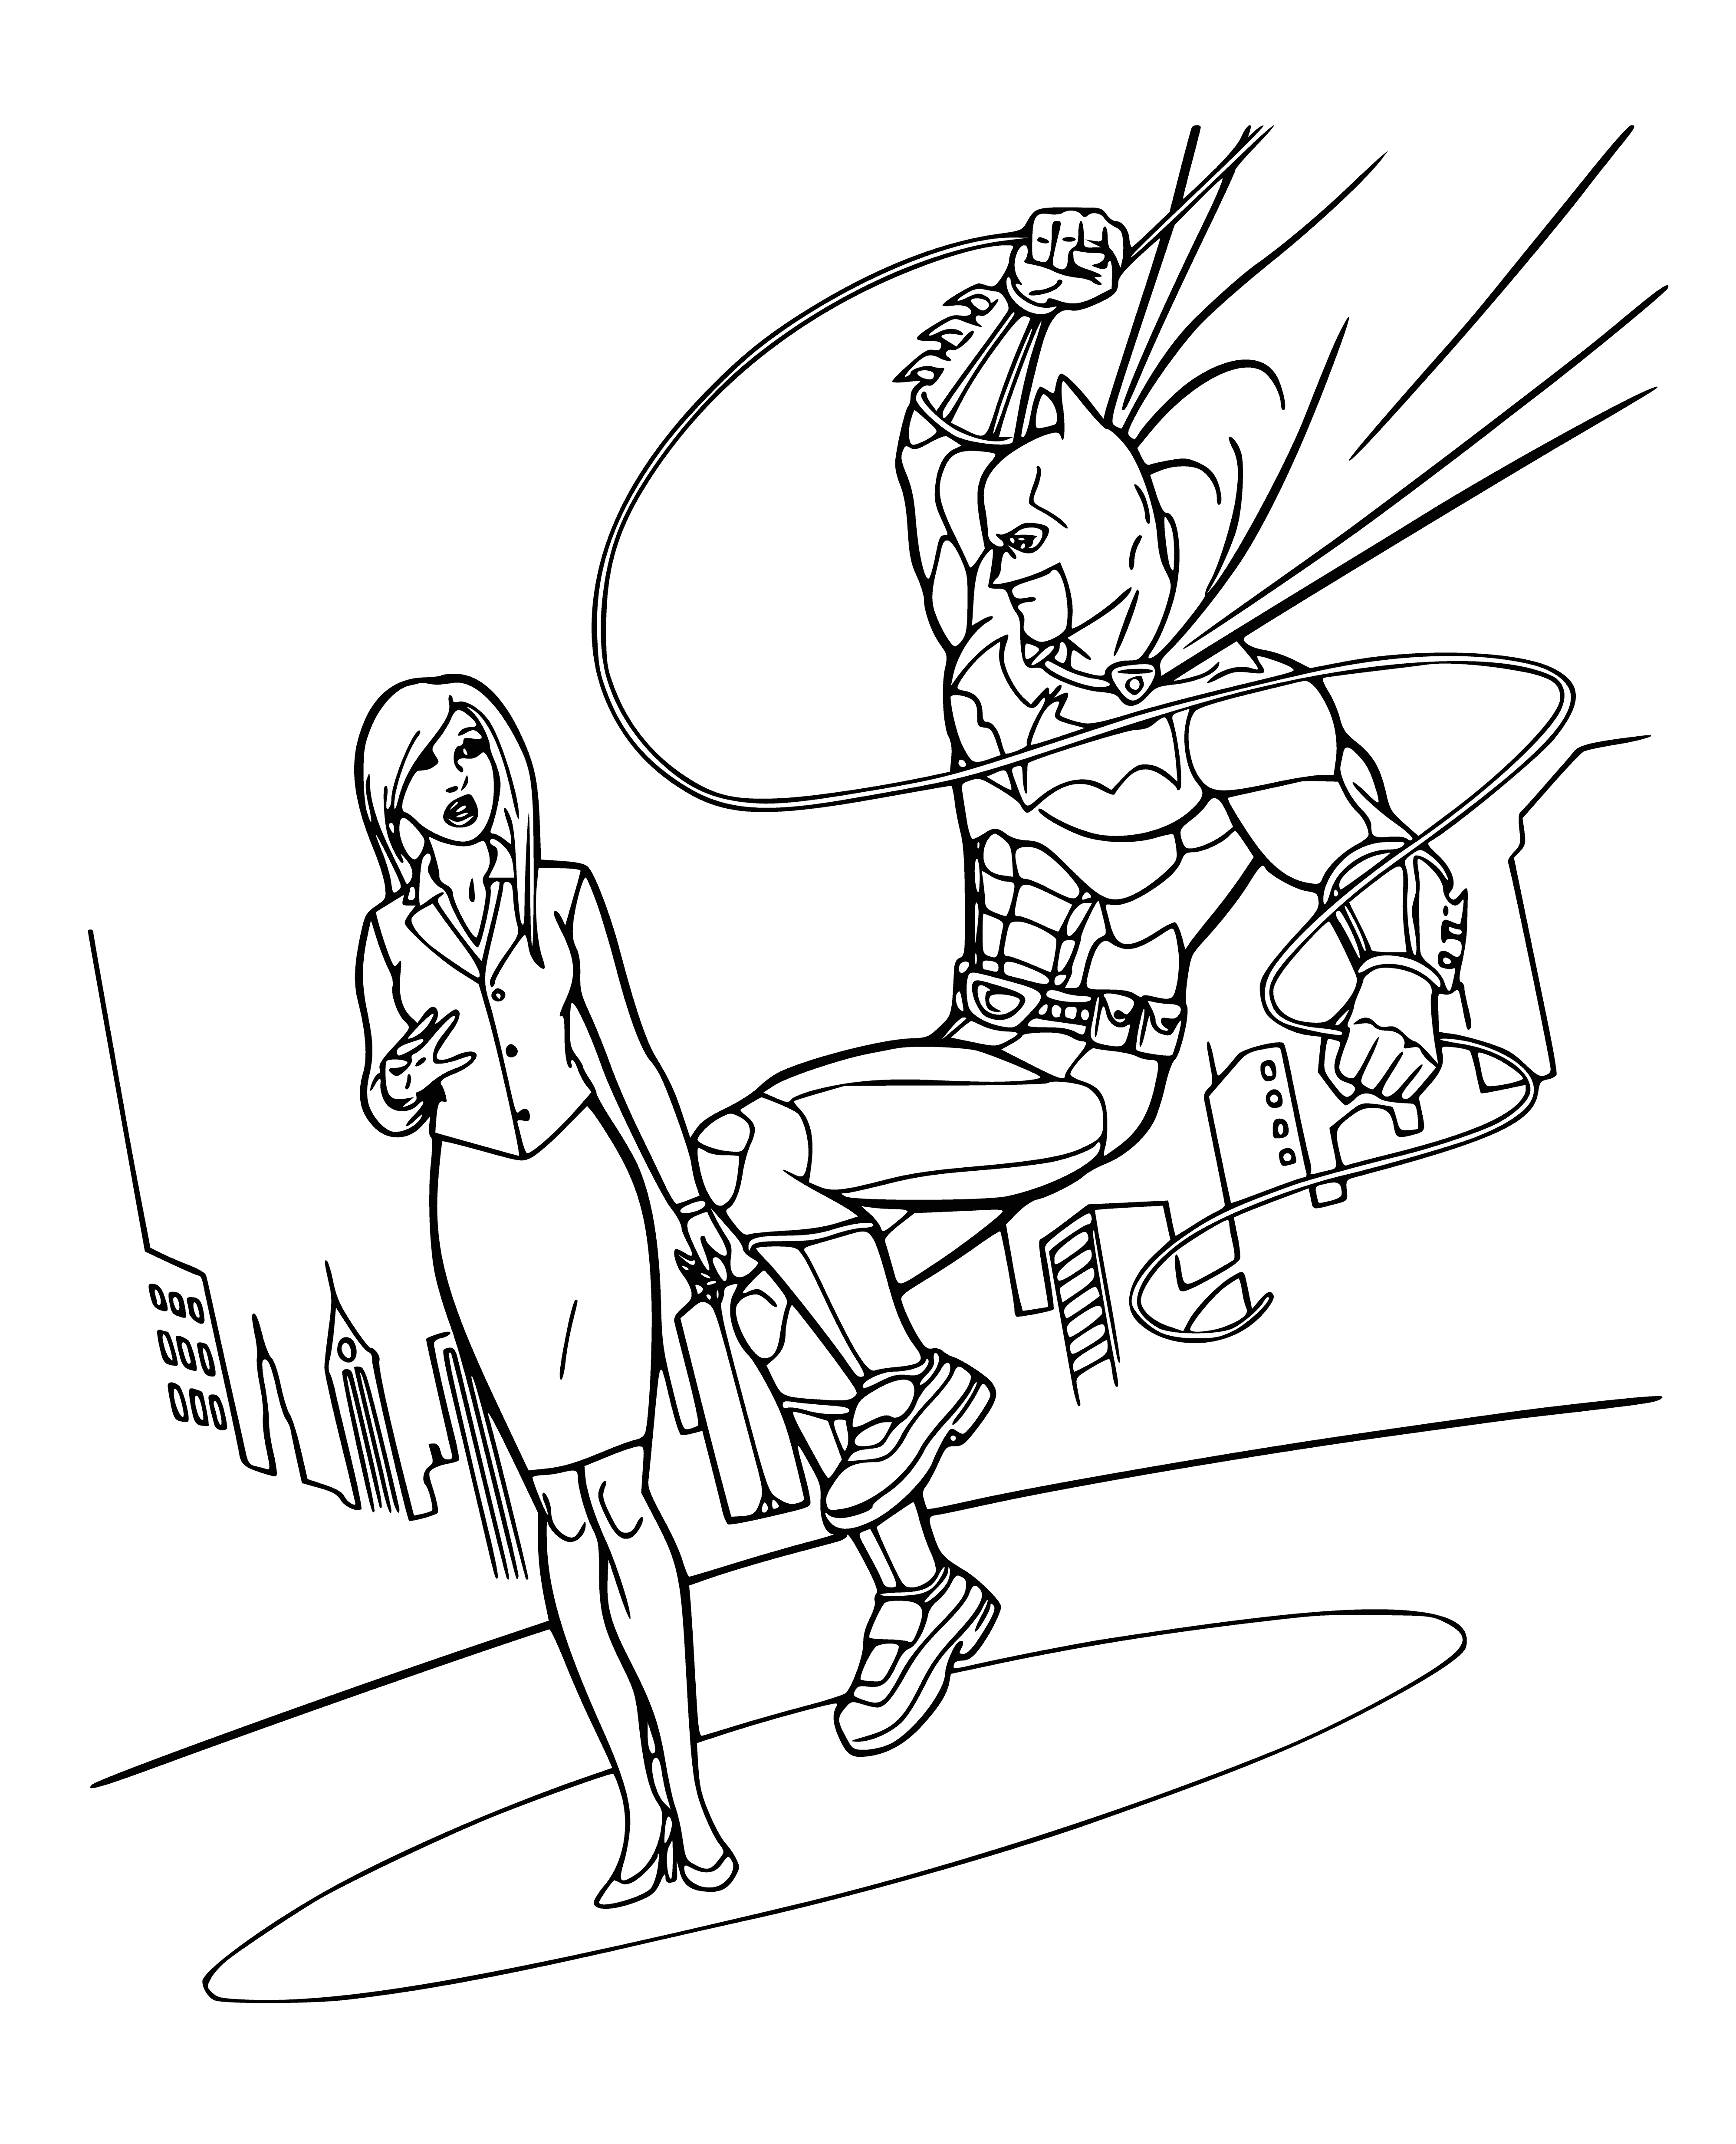 coloring page: A mysterious, powerful figure dressed in a cape & cowl, with piercing eyes ready to fight.